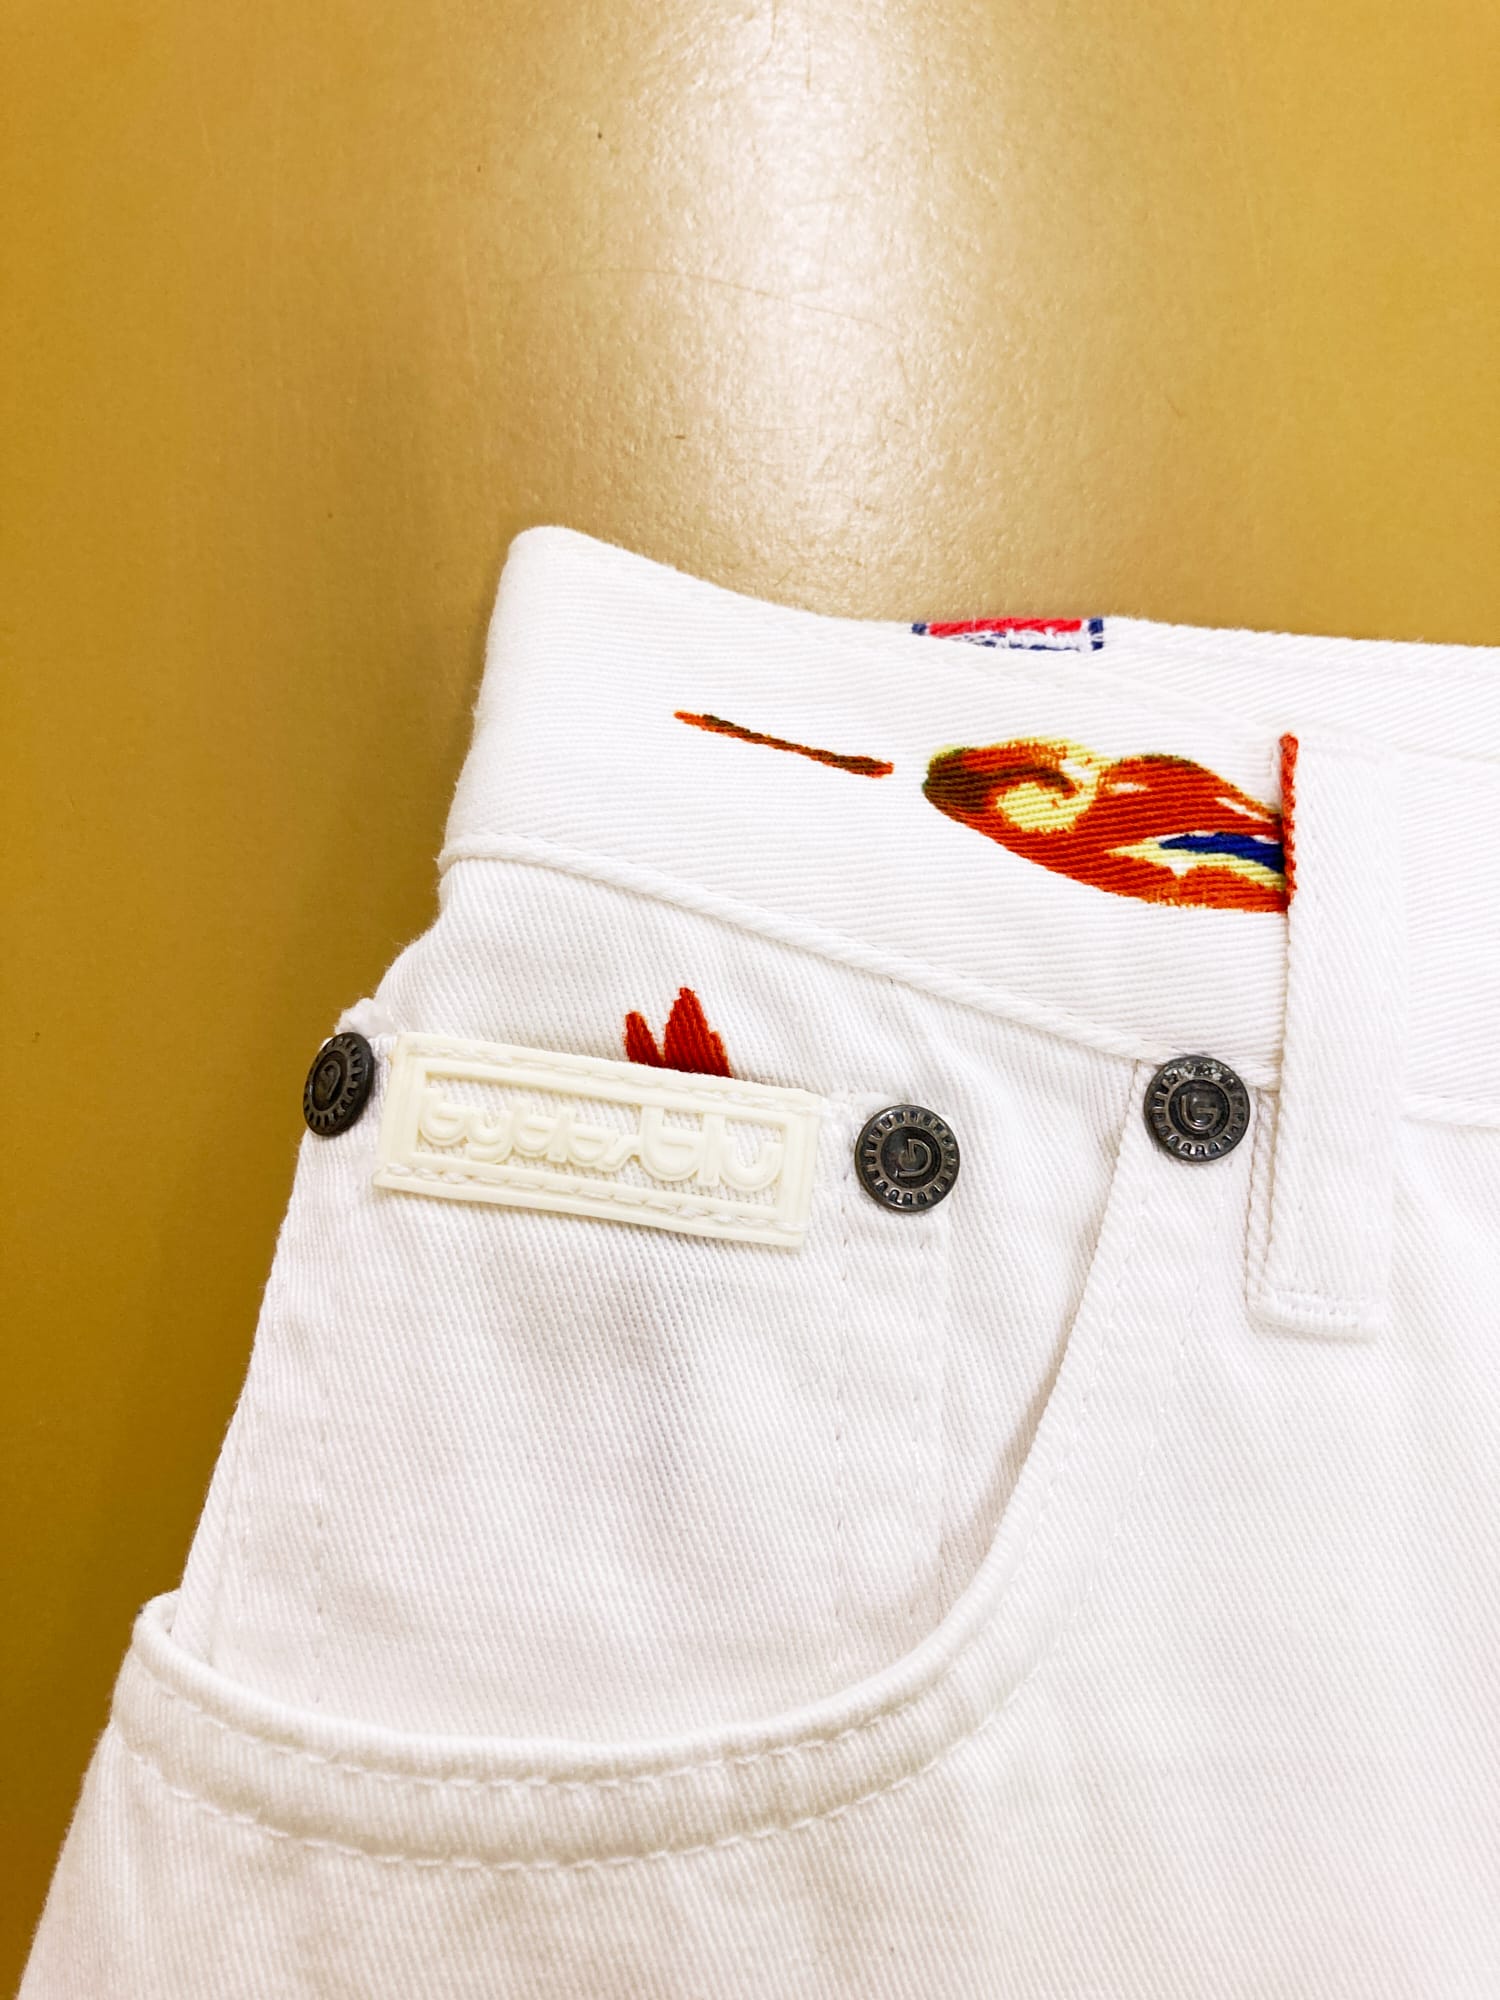 Byblos Blu 1990s white denim jeans with red floral and geometric print